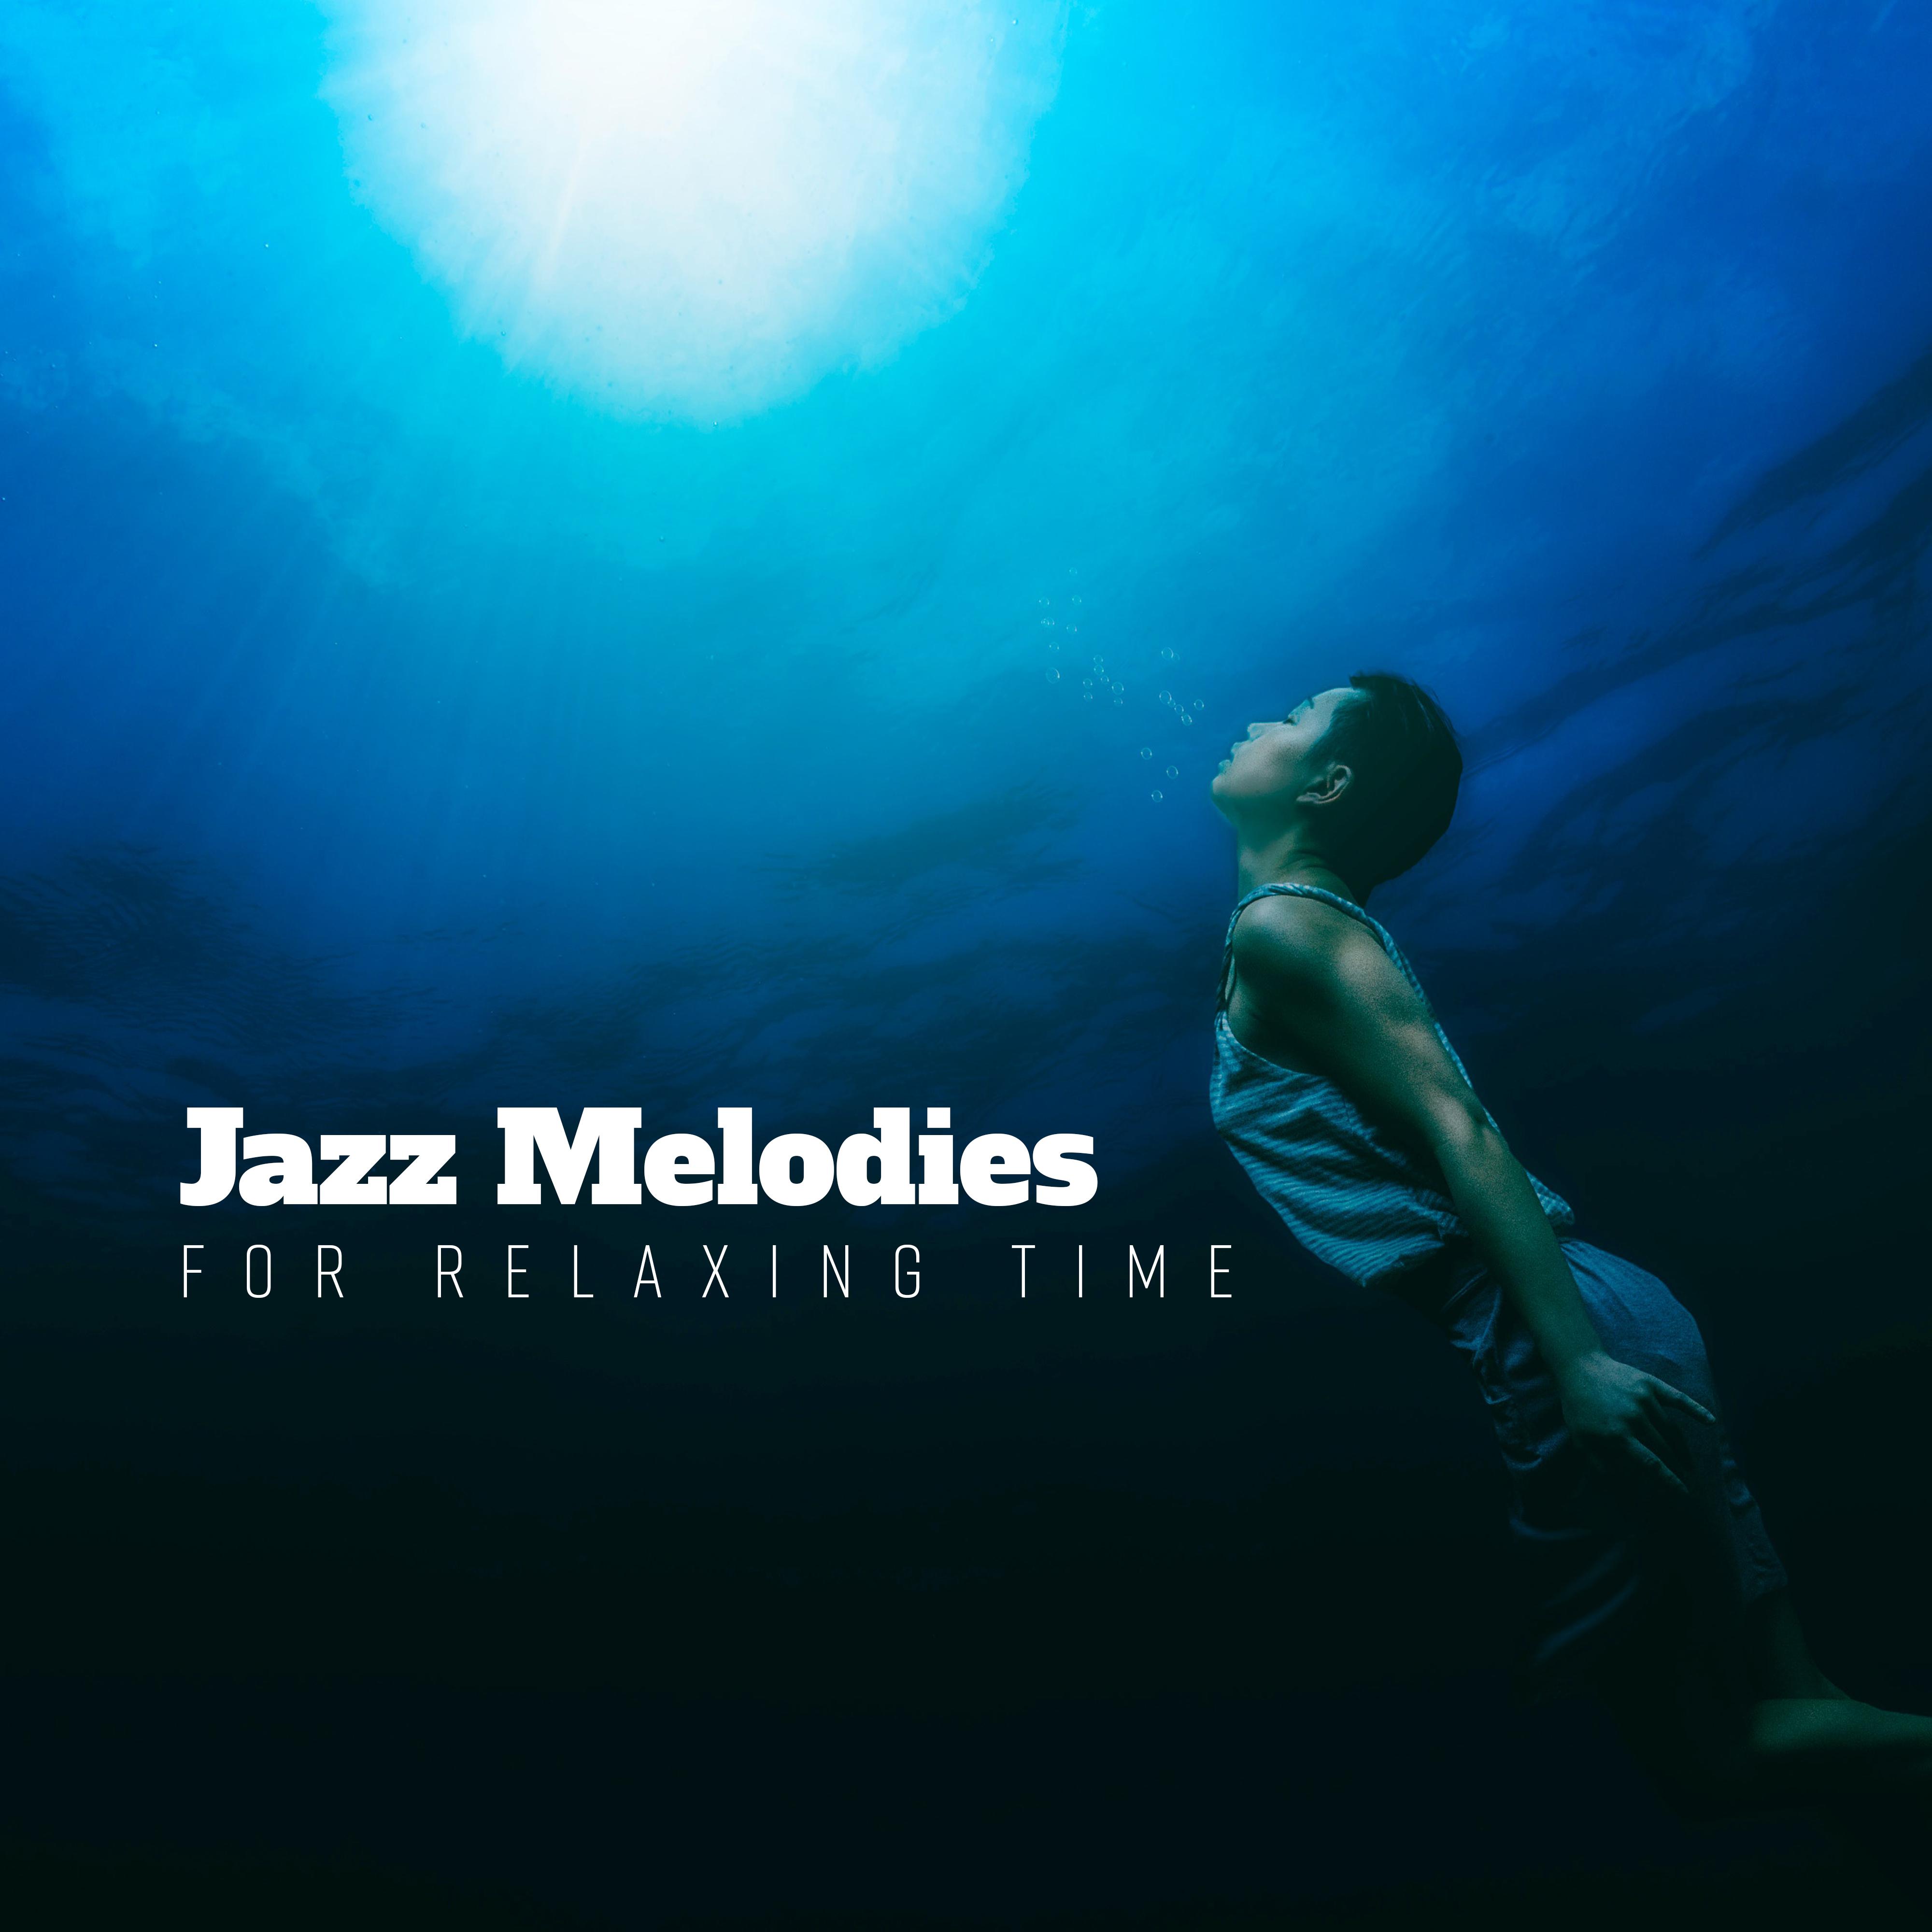 Jazz Melodies for Relaxing Time